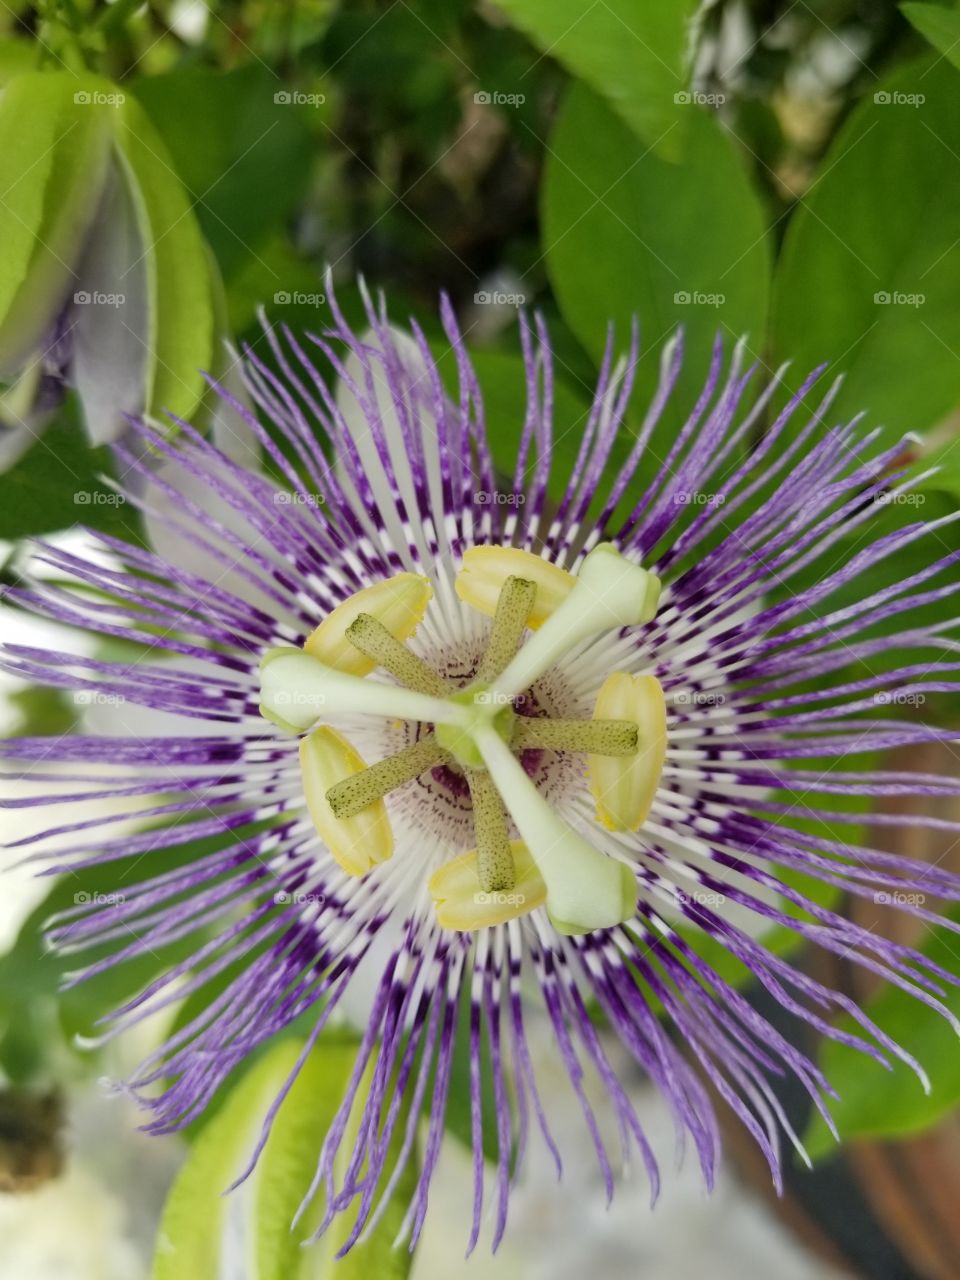 I am full of wonderful virbant colors of yellow,light green and white.I am a passion flower.